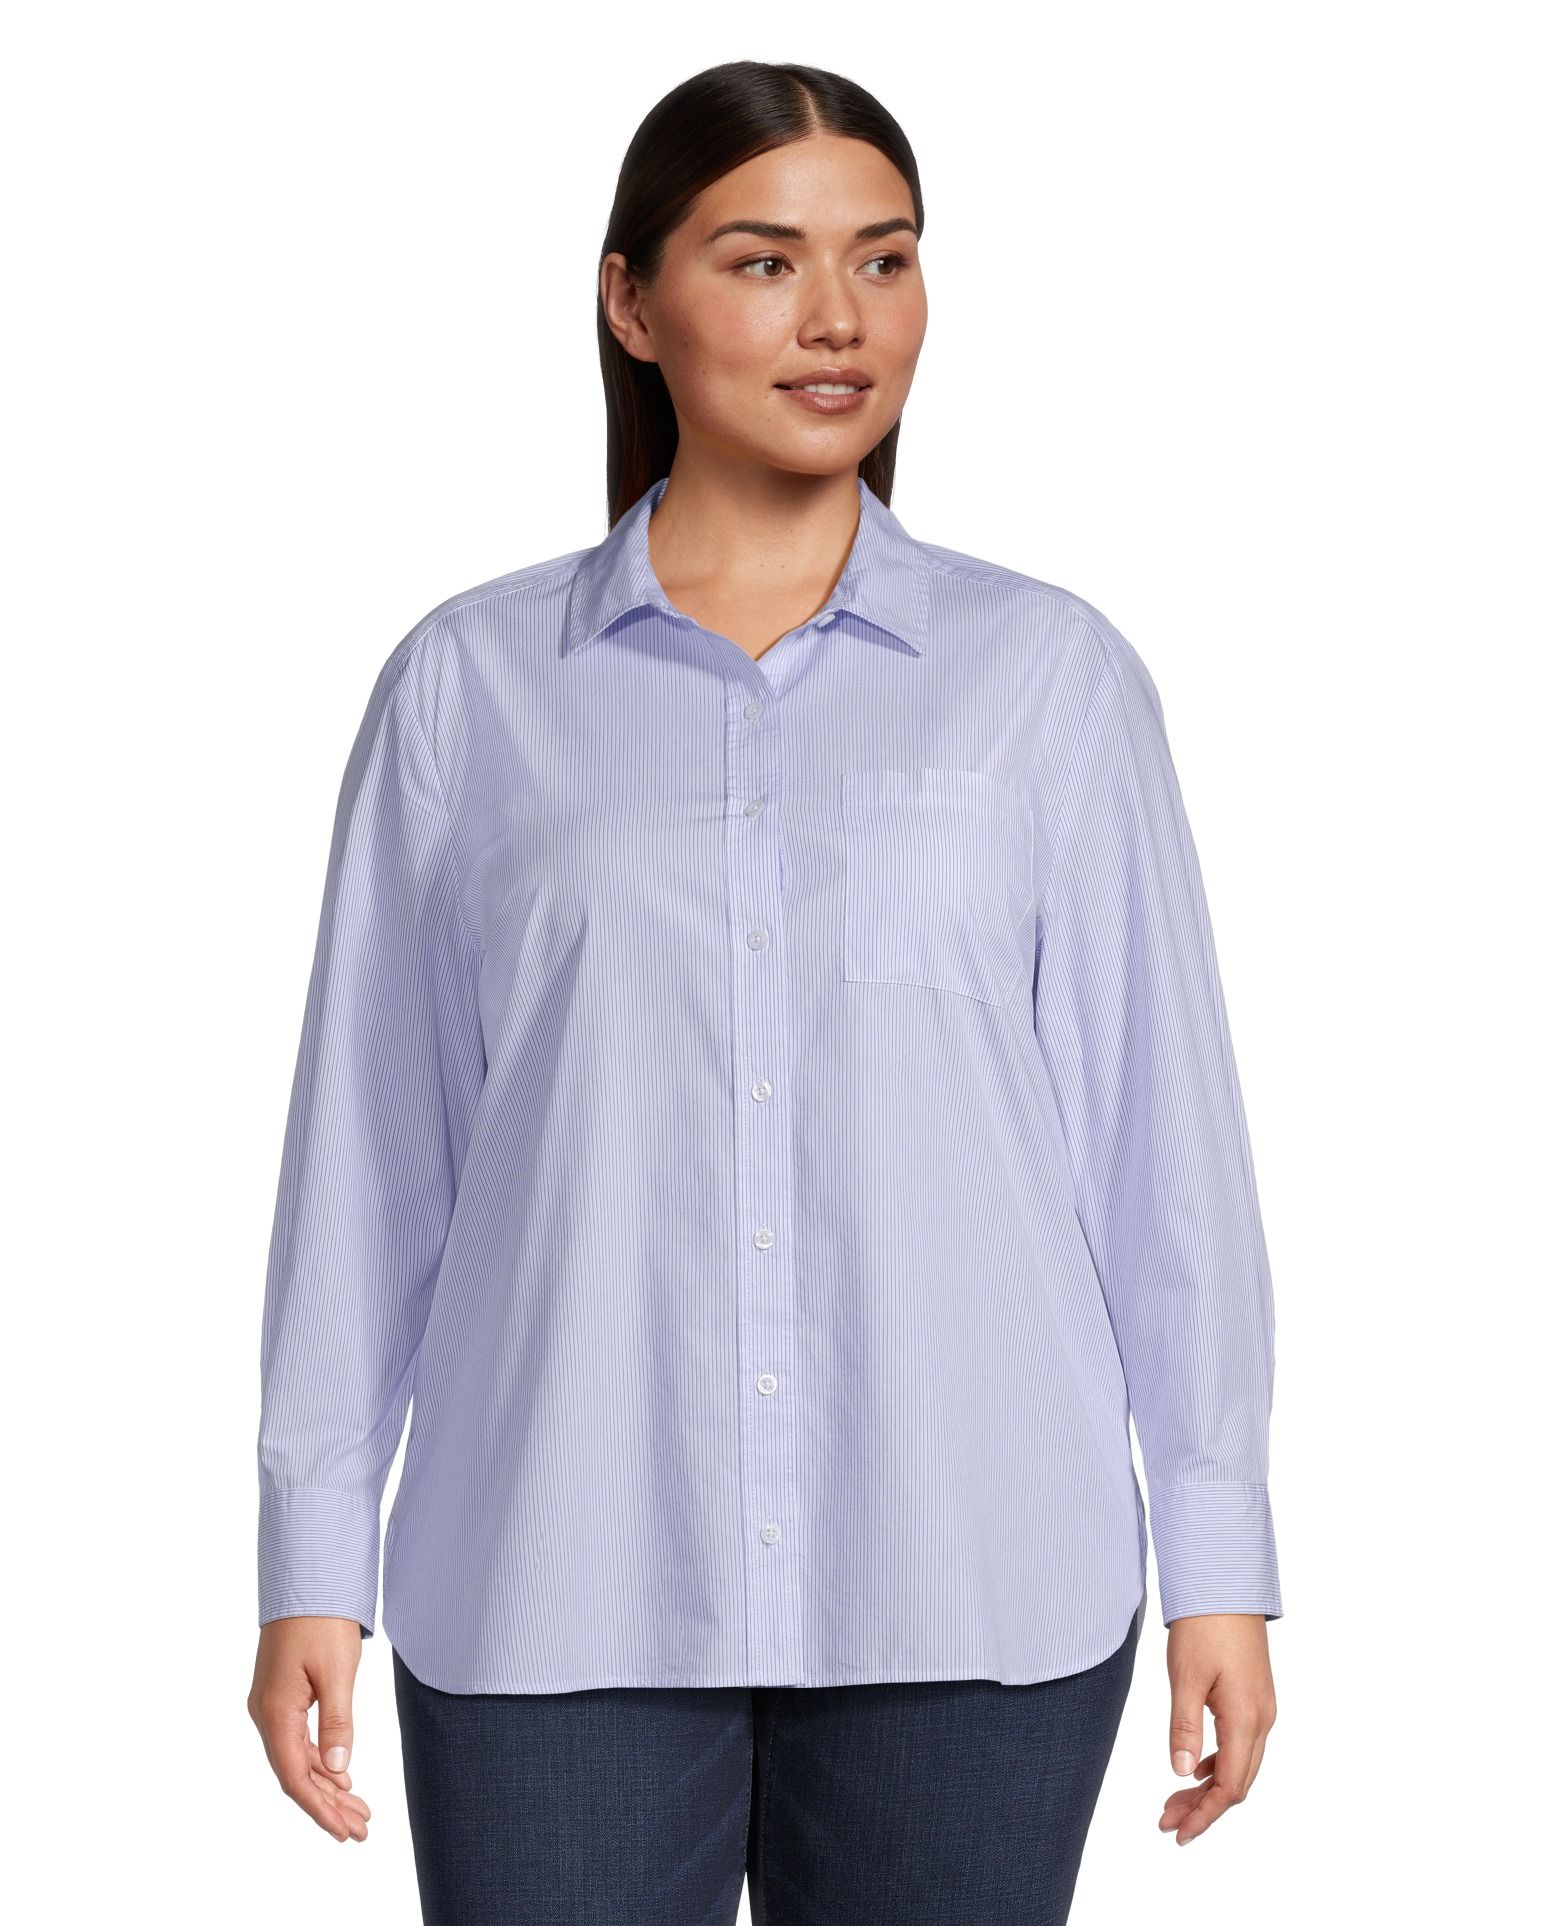 Denver Hayes Women's Semi Fitted Long Sleeve Button Up Shirt | Marks